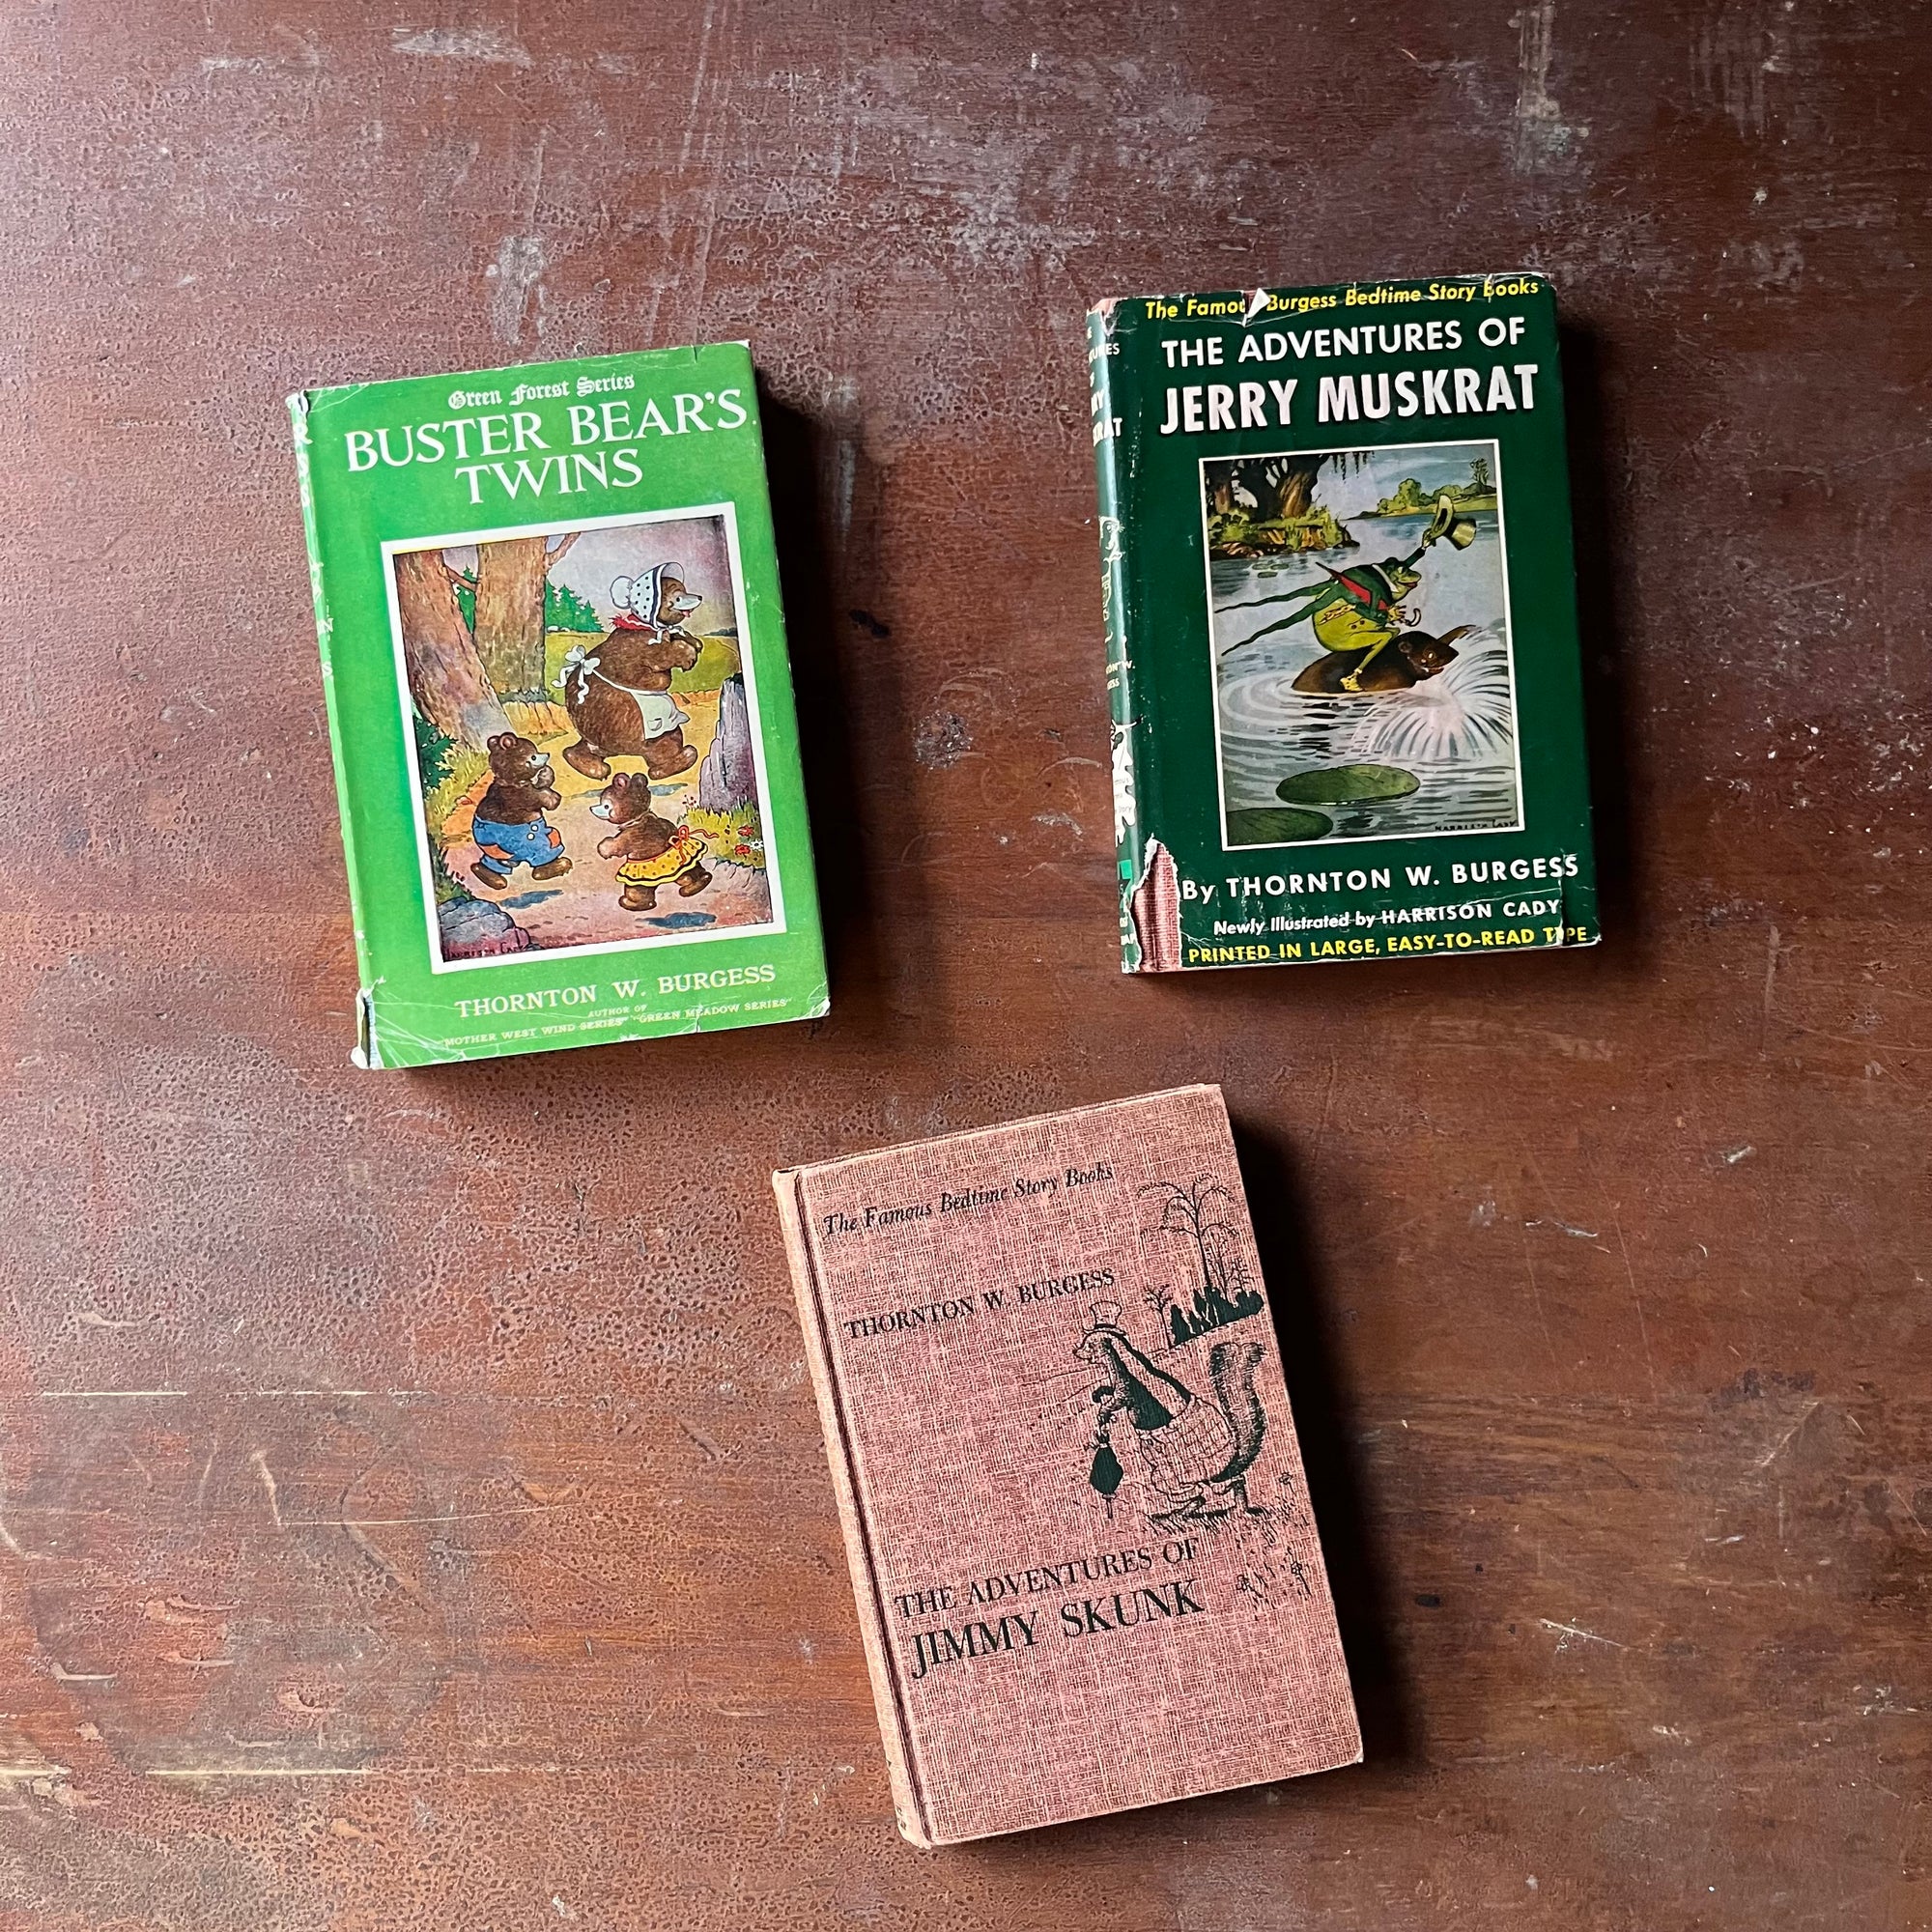 vintage children's chapter books, antiquarian books for children - Set of Three Thorton W. Burgess Books:  Buster Bears Twins, The Adventures of Jerry Muskrat, and The Adventures of Jimmy Skunk all illustrated by Harrison Cady - view of the dust jacket's front covers